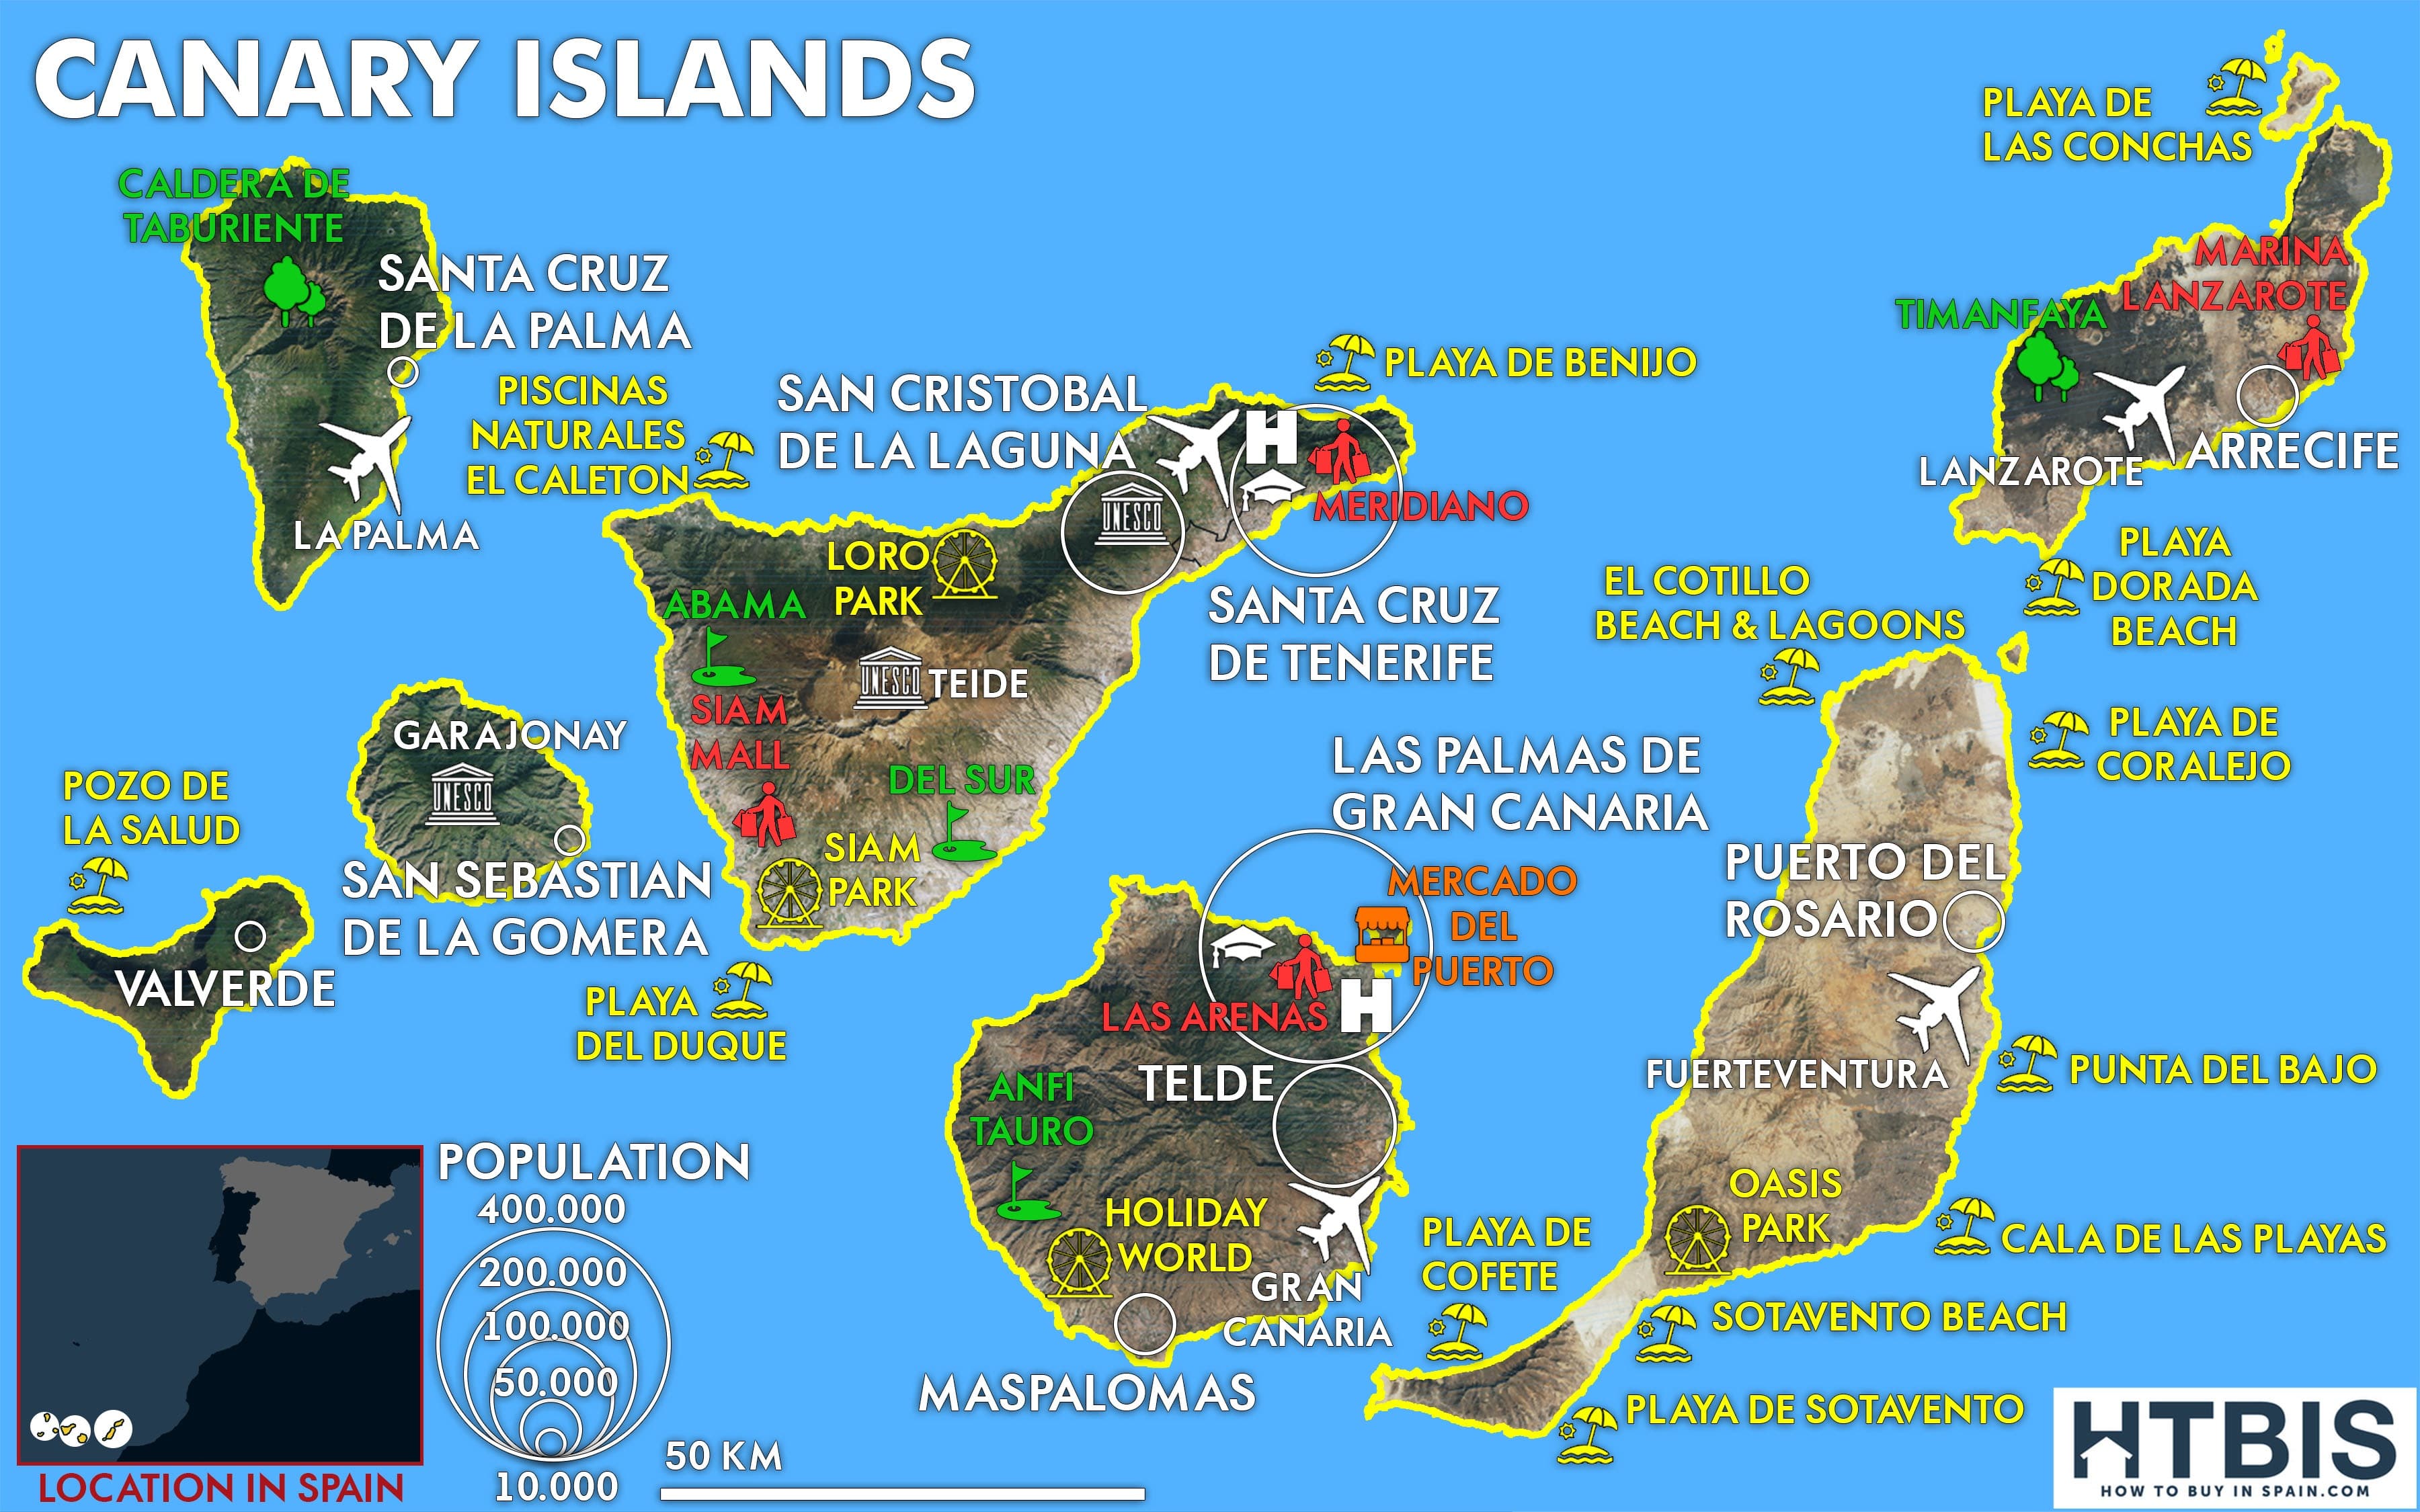 Discover the wonderful Canary Islands